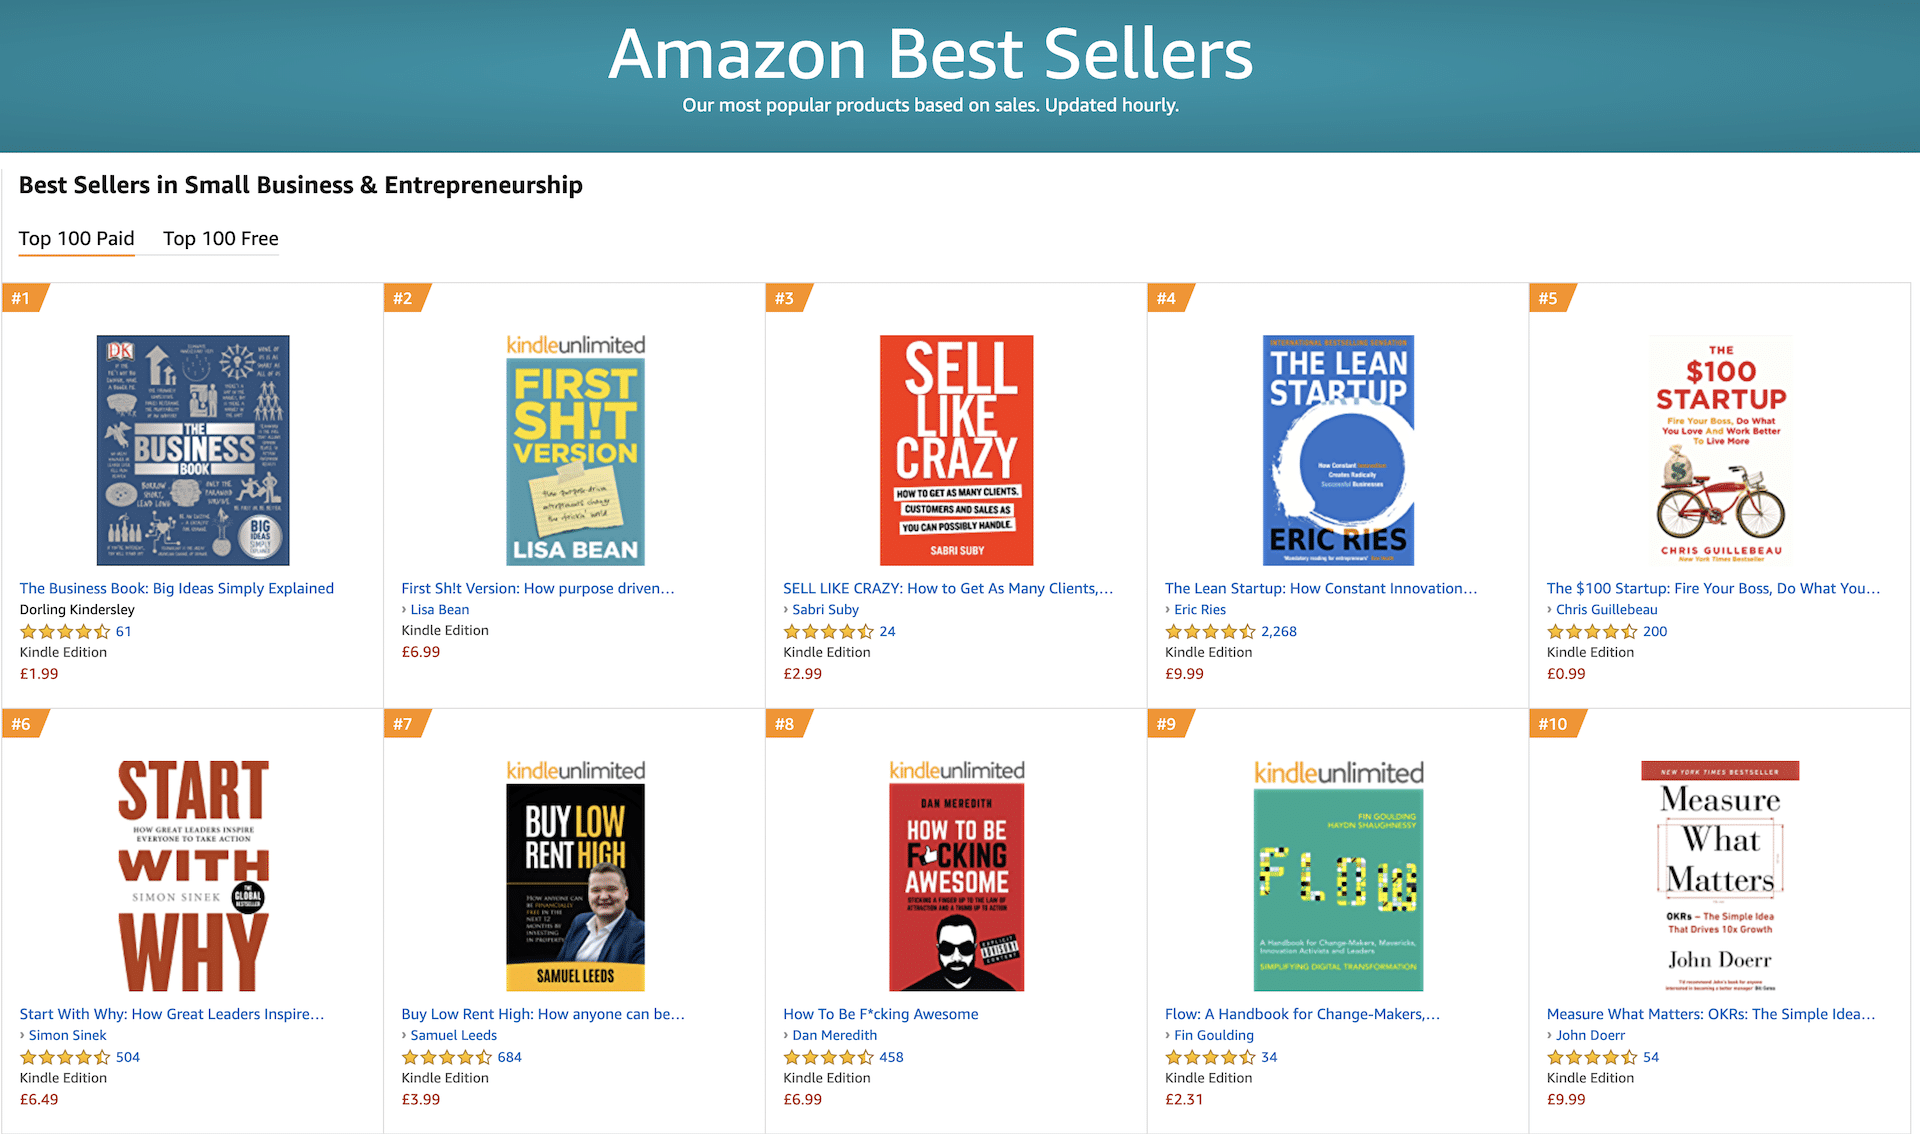 Number 2 Amazon Best Selling Book